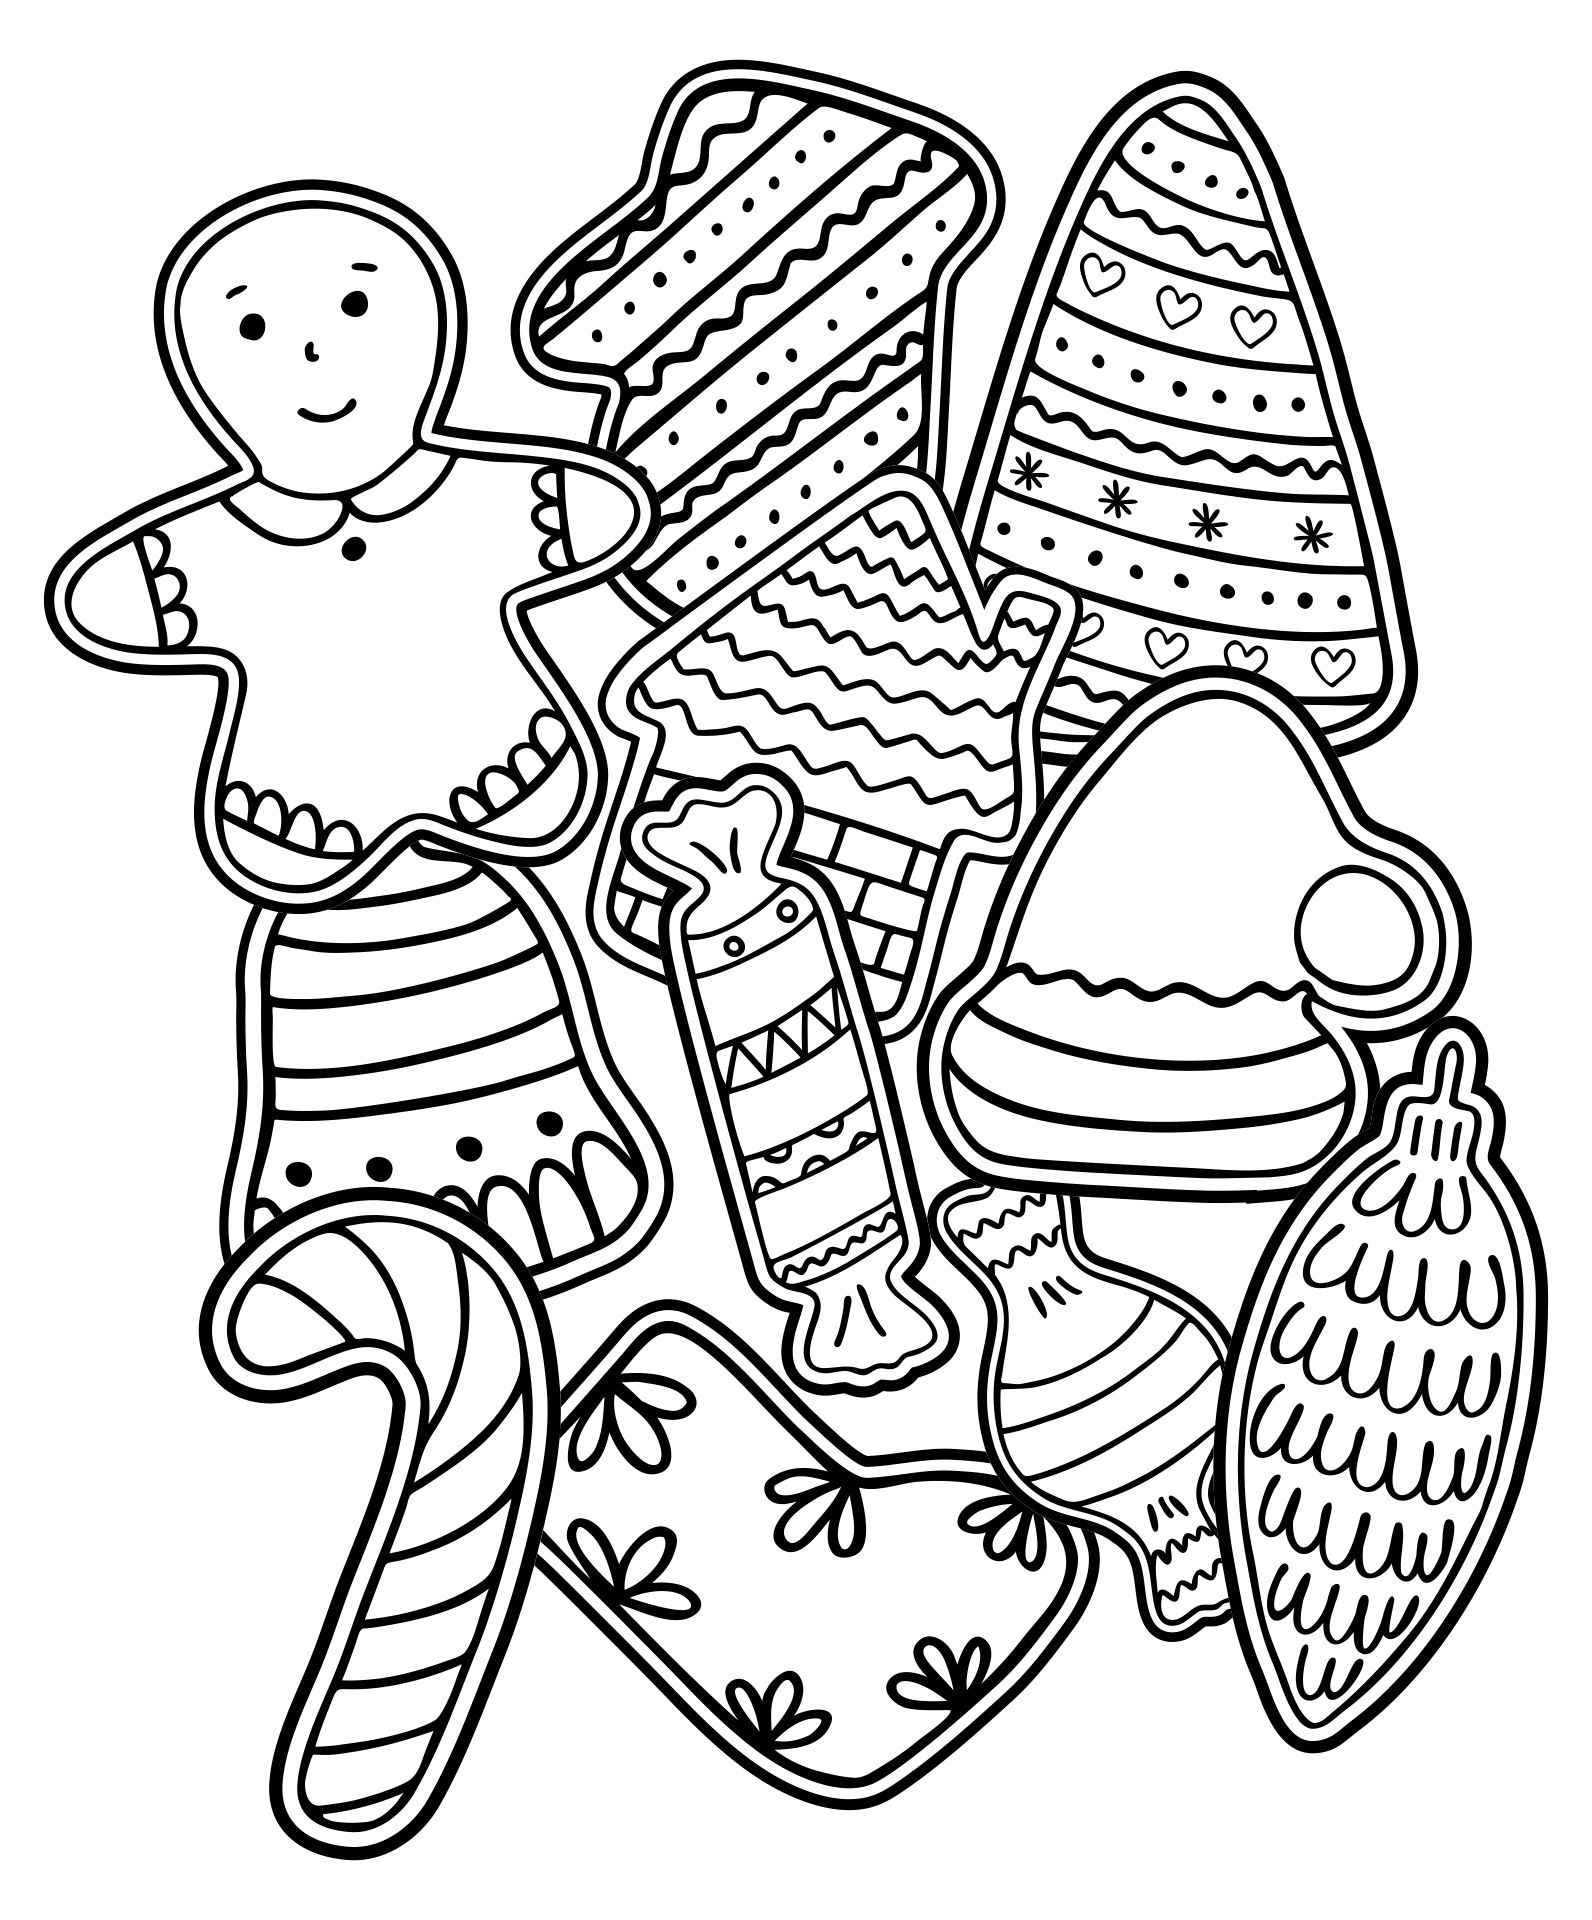 Printable Christmas Cookie Collage Coloring Page